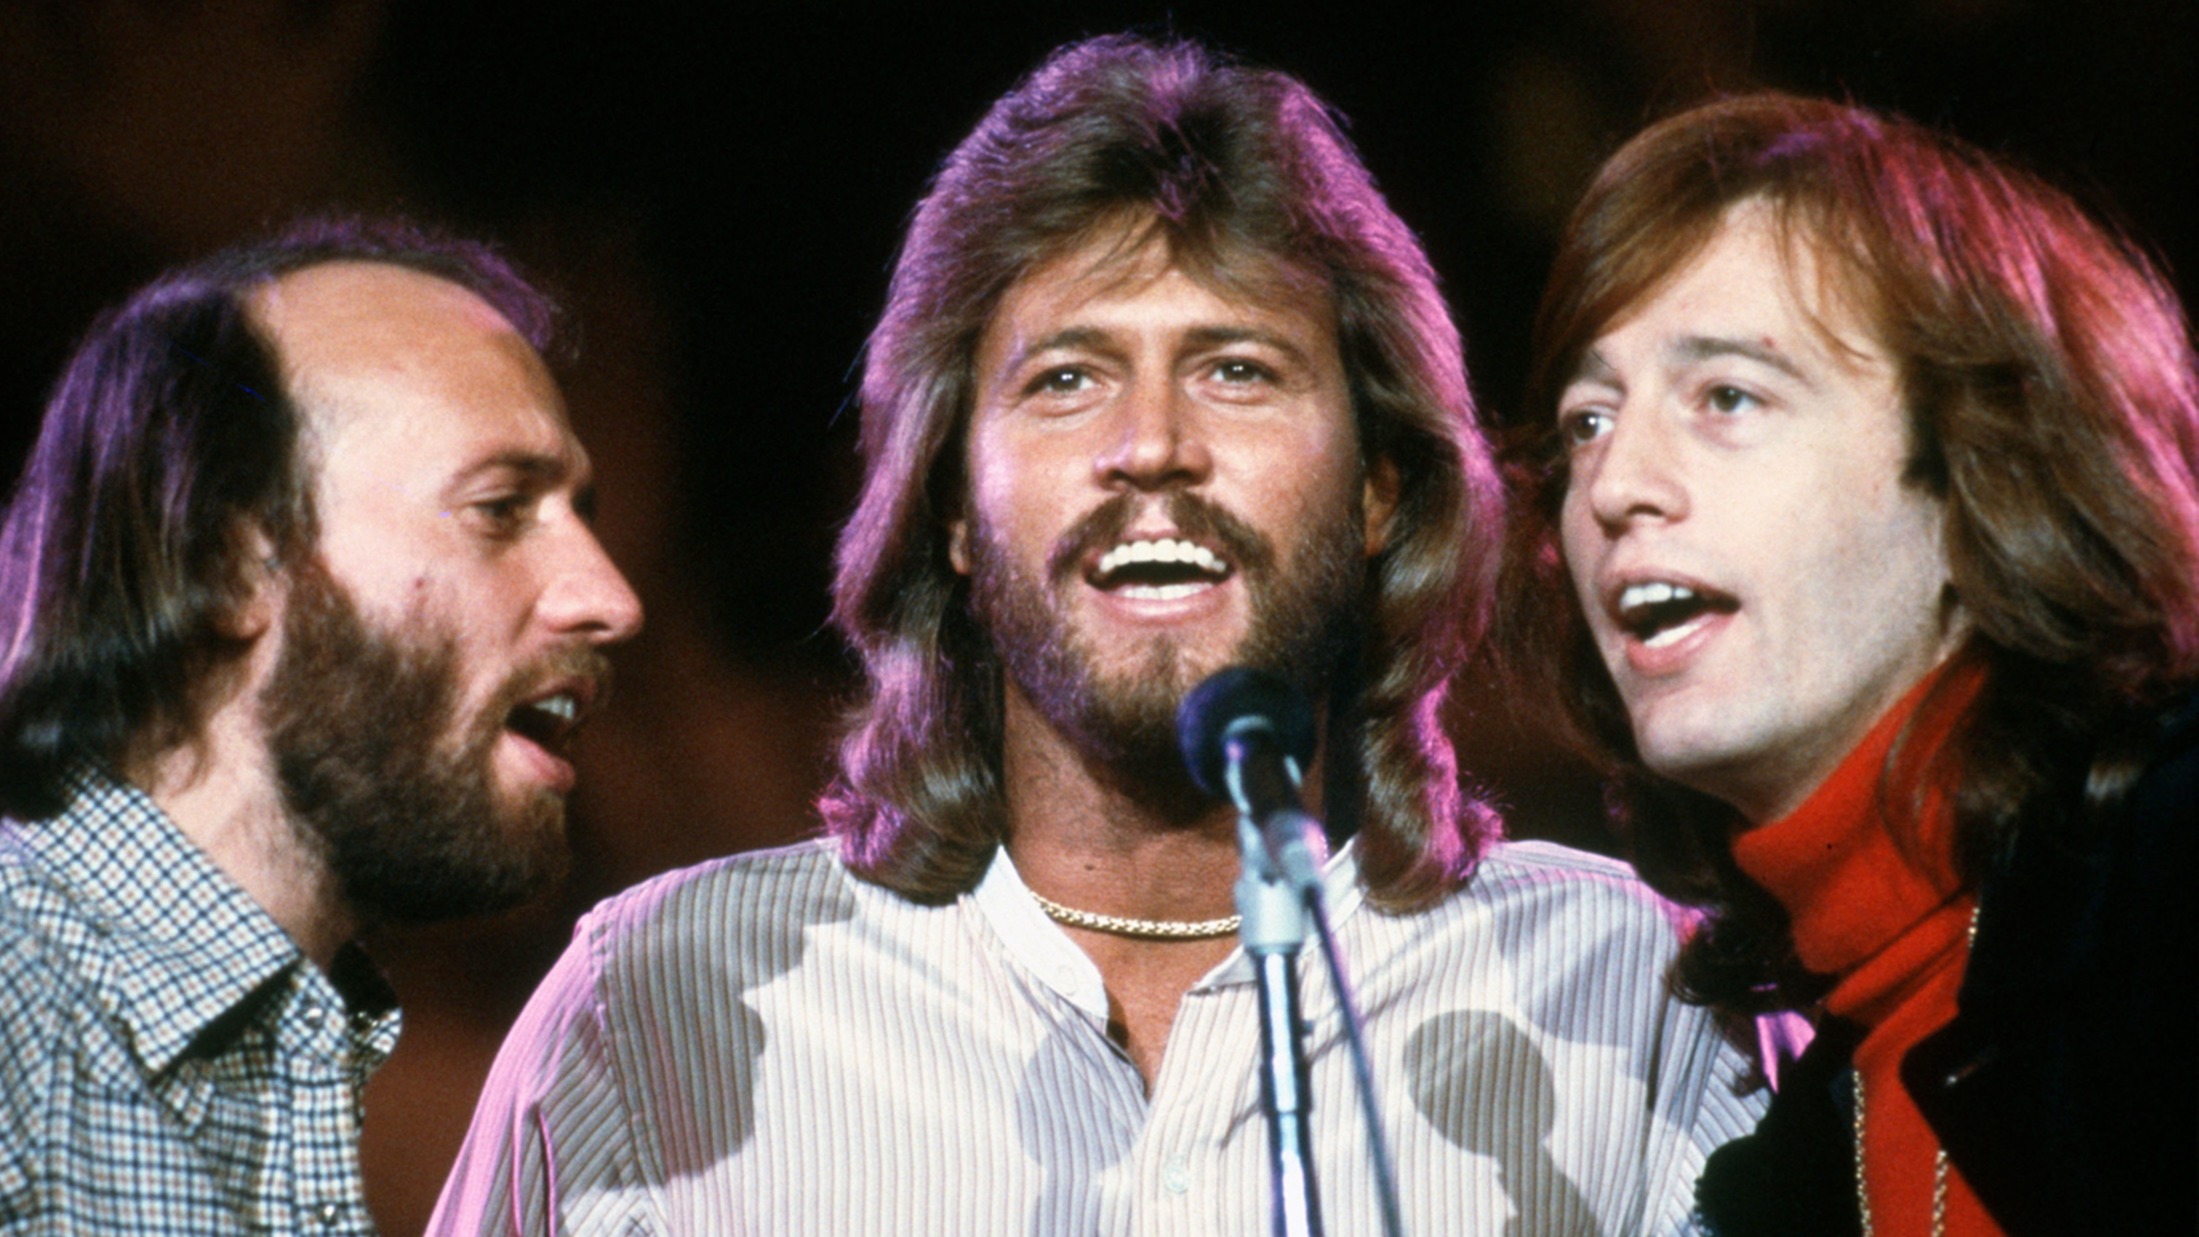 How Deep Is Your Love (The Bee Gees) by B. Gibb, M. Gibb, R. Gibb